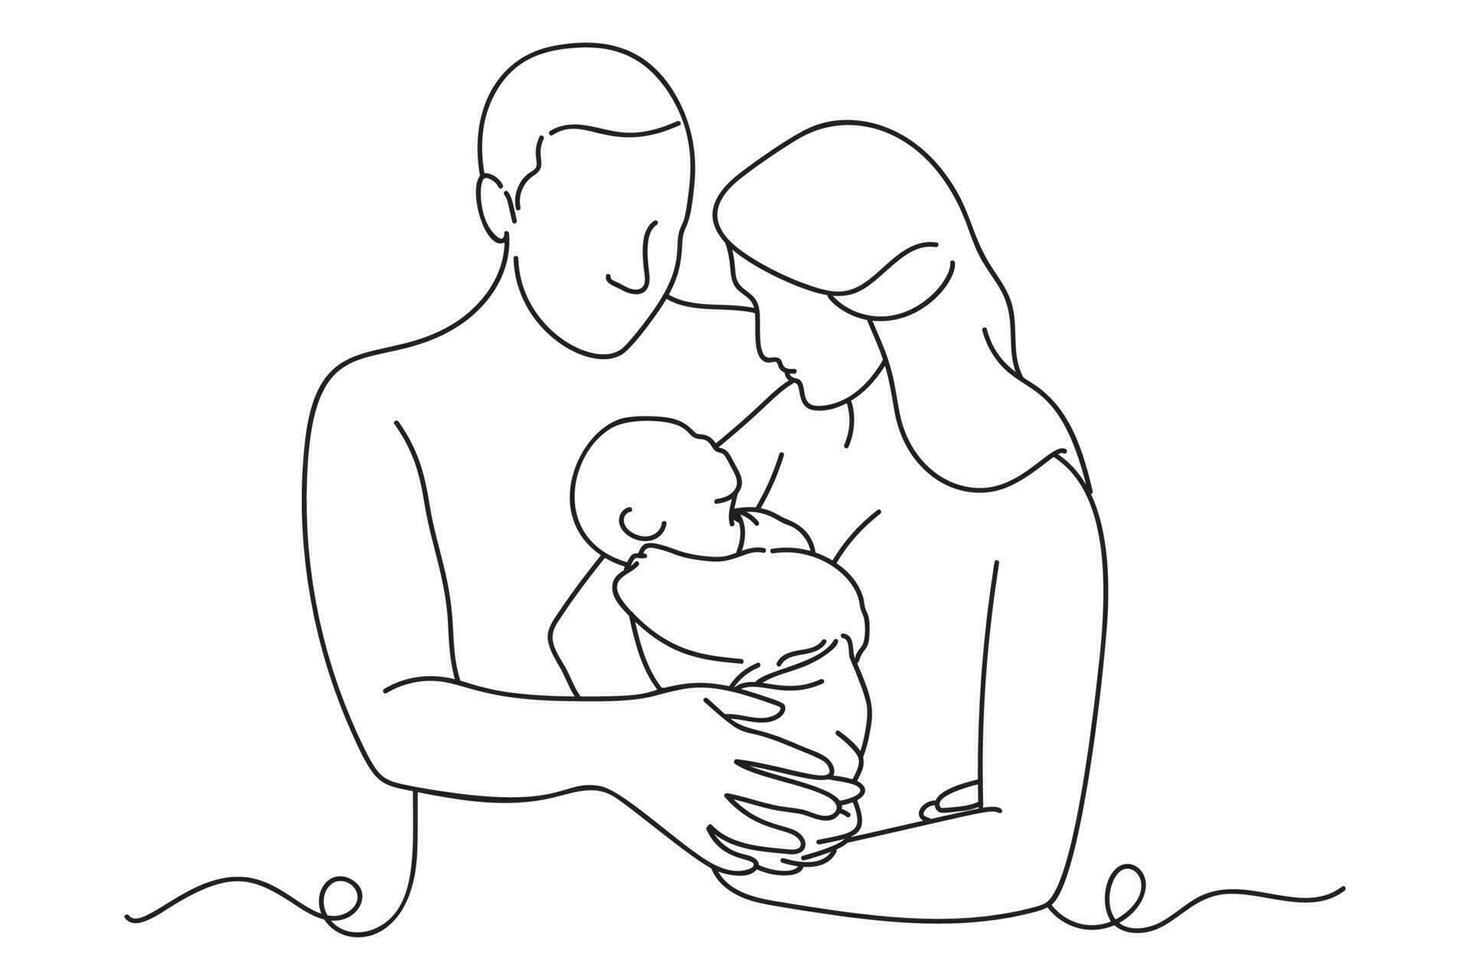 Continuous one line drawing of mother and father holding their newborn baby. Vector illustration